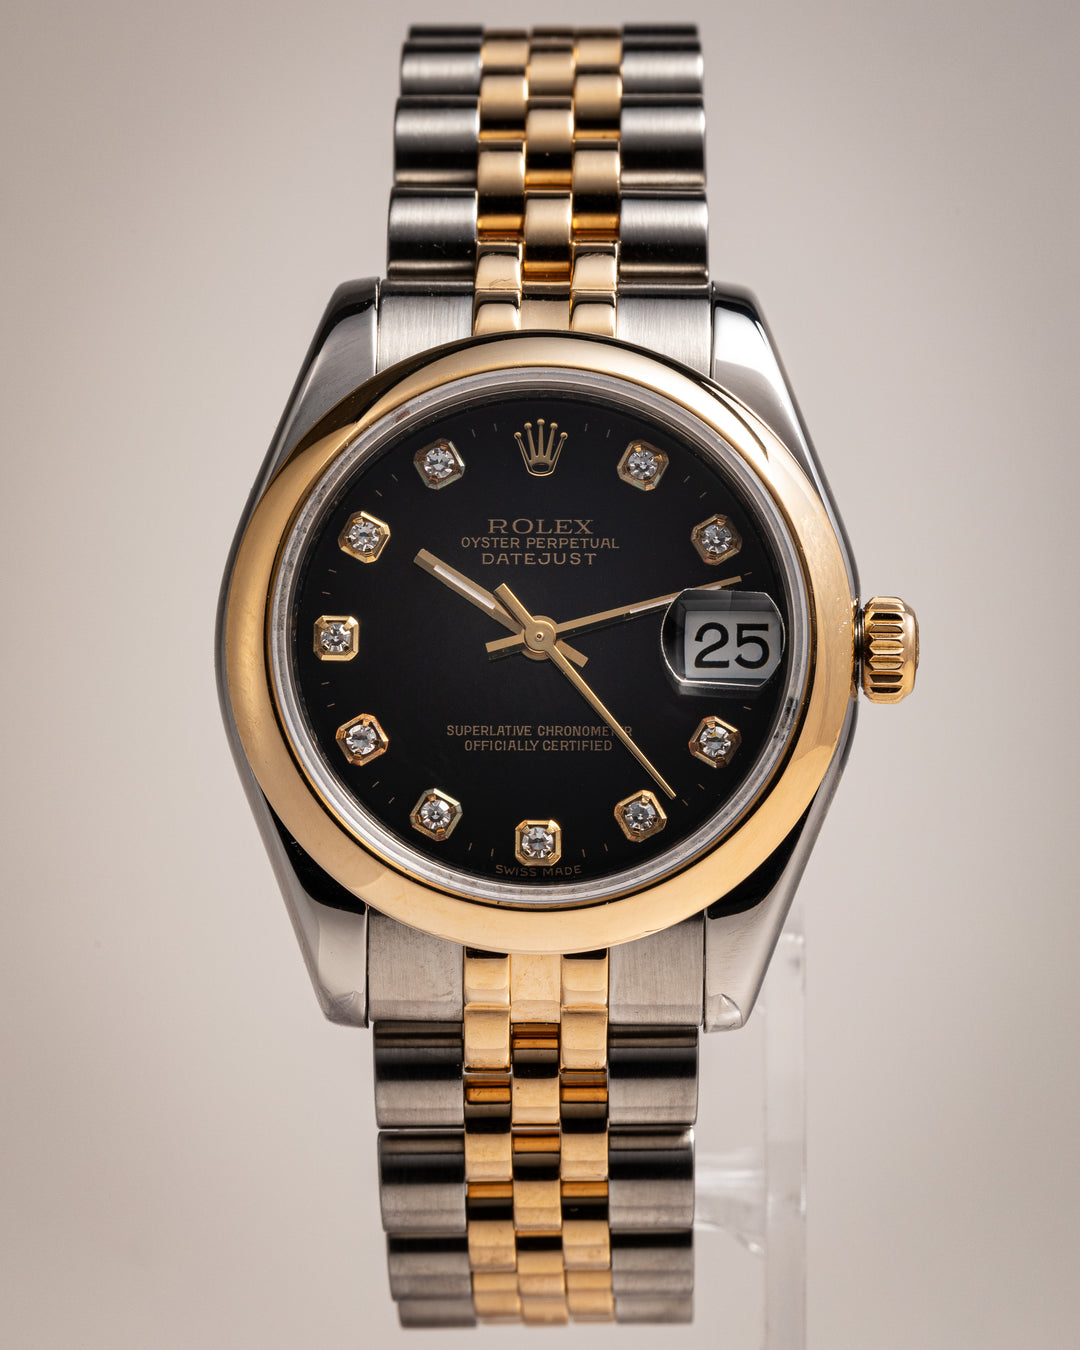 Rolex Stainless Steel and 18k Yellow Gold Datejust (178263)